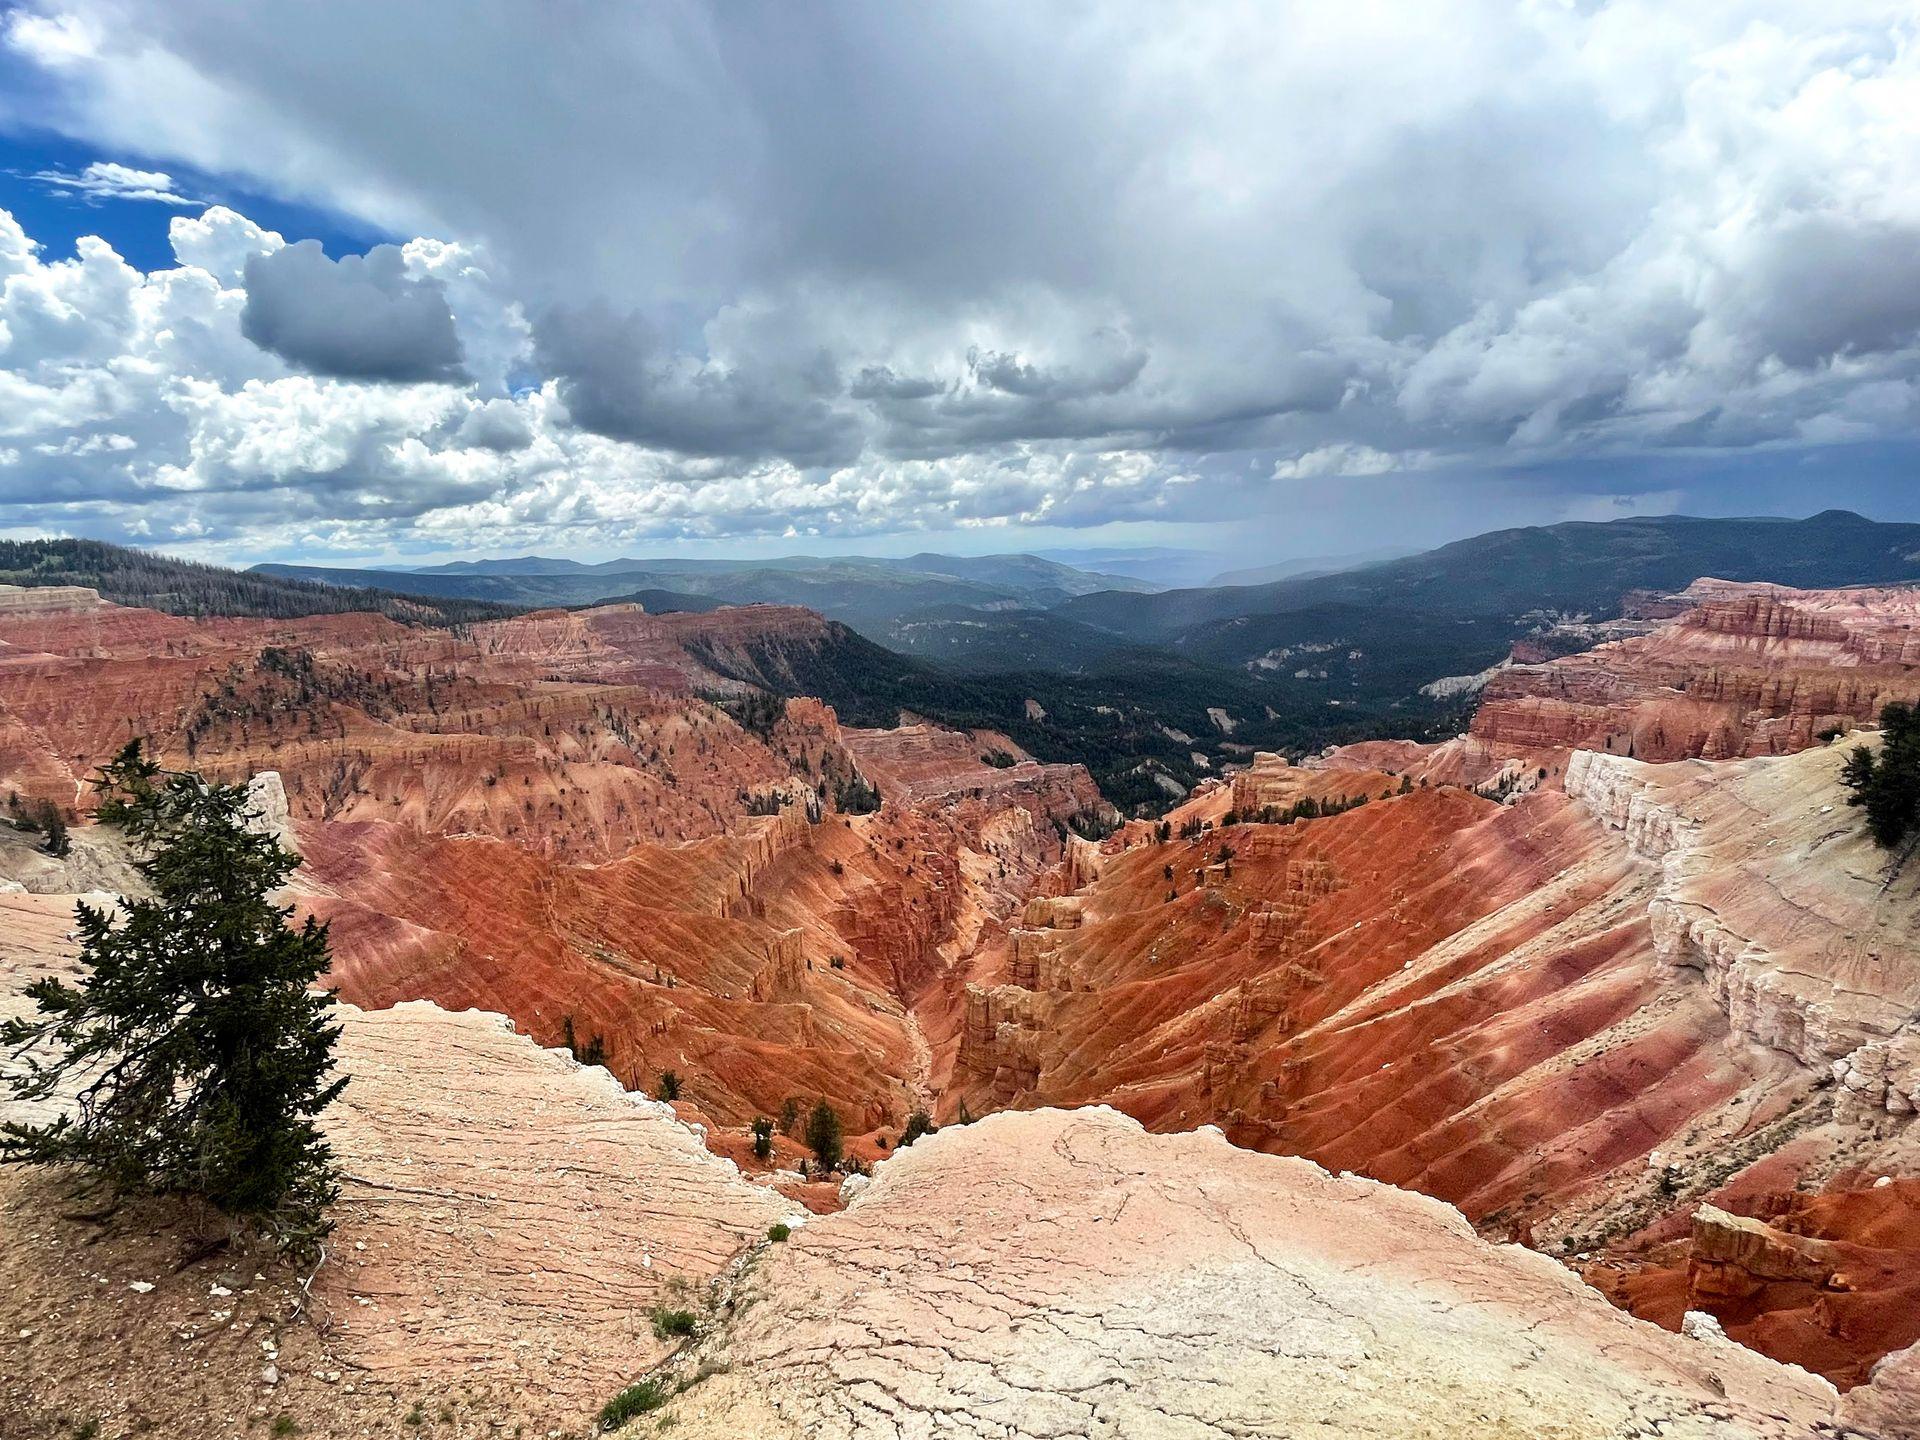 A view from an overlook at Cedar Breaks National Monument. There are orange rocks that resemble hoodoos.